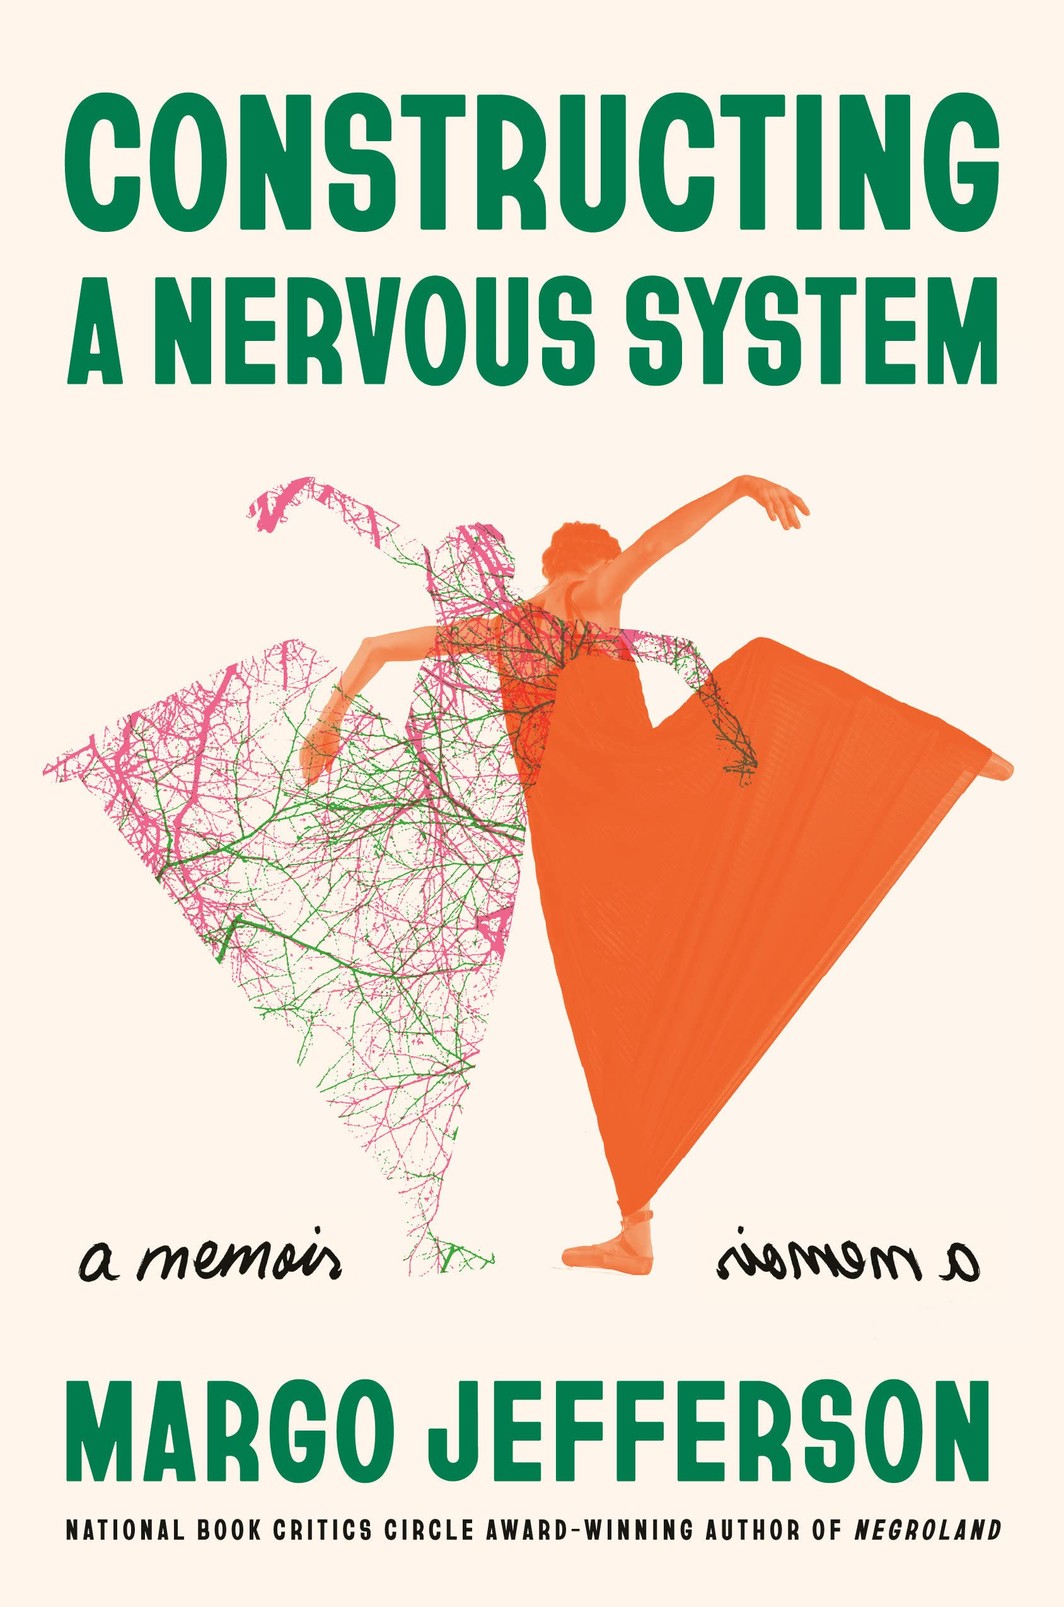 The cover of Constructing a Nervous System